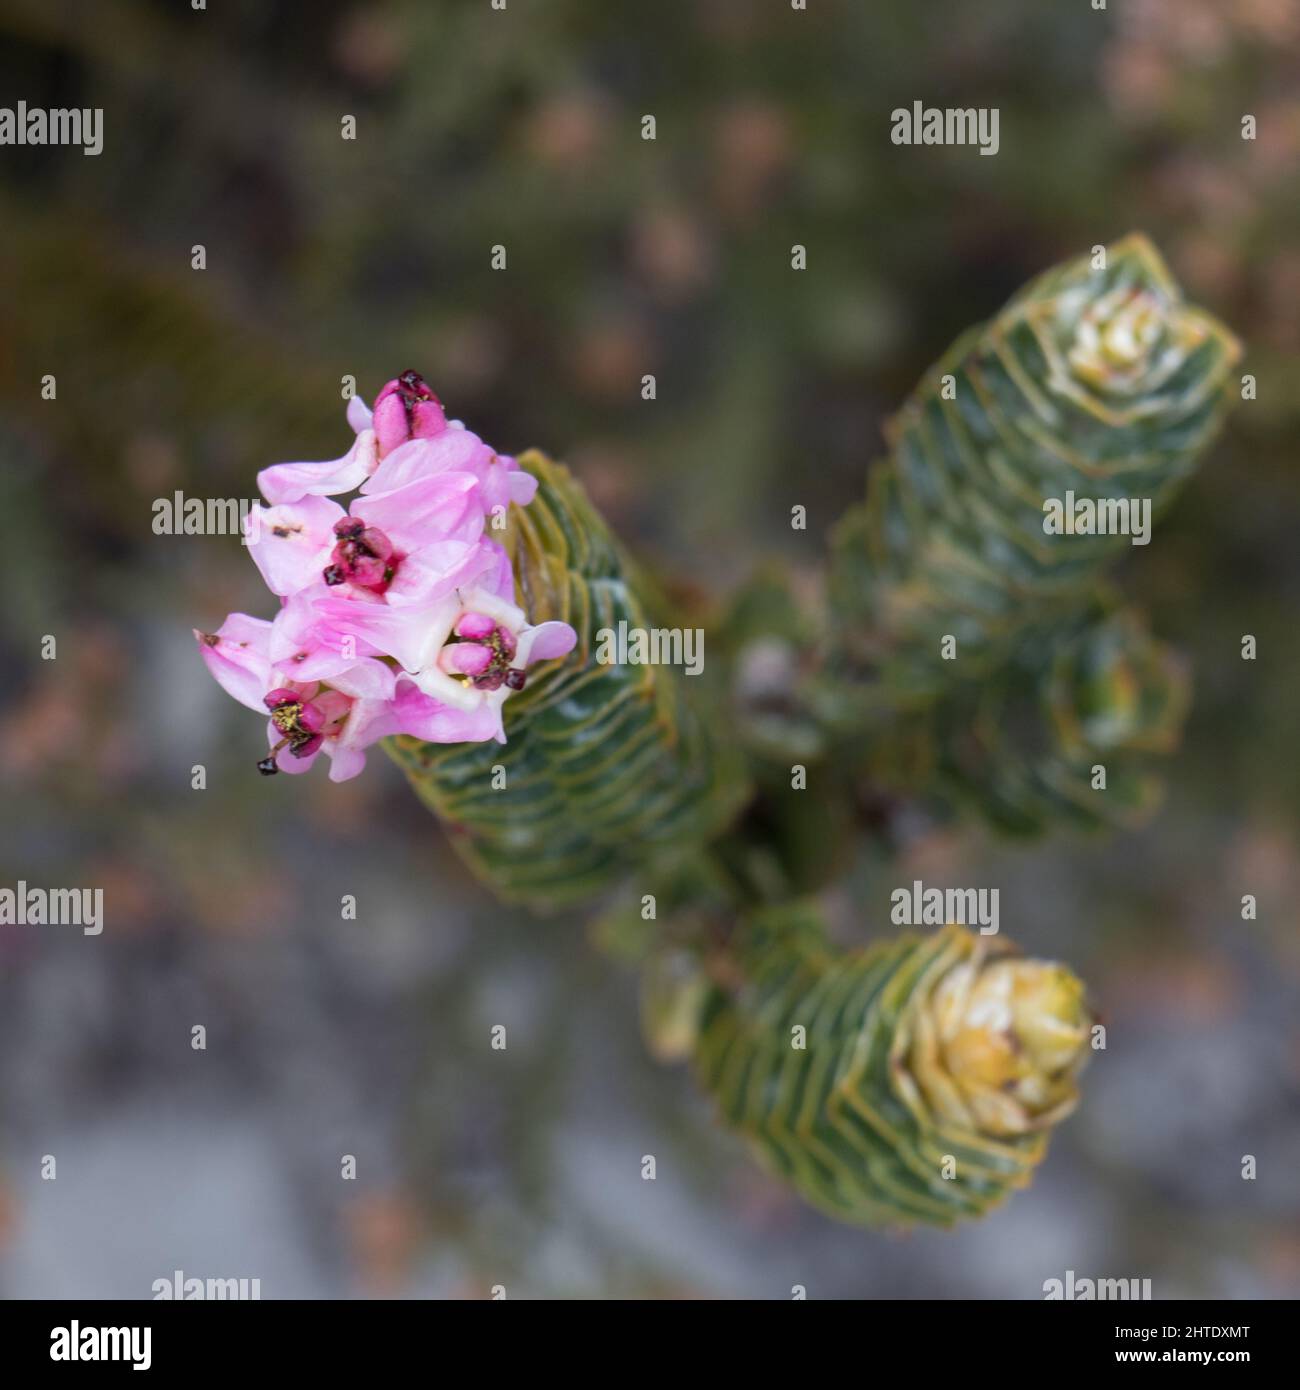 Succulant plant with flowers in Kogelberg Nature reserve, South Africa Stock Photo